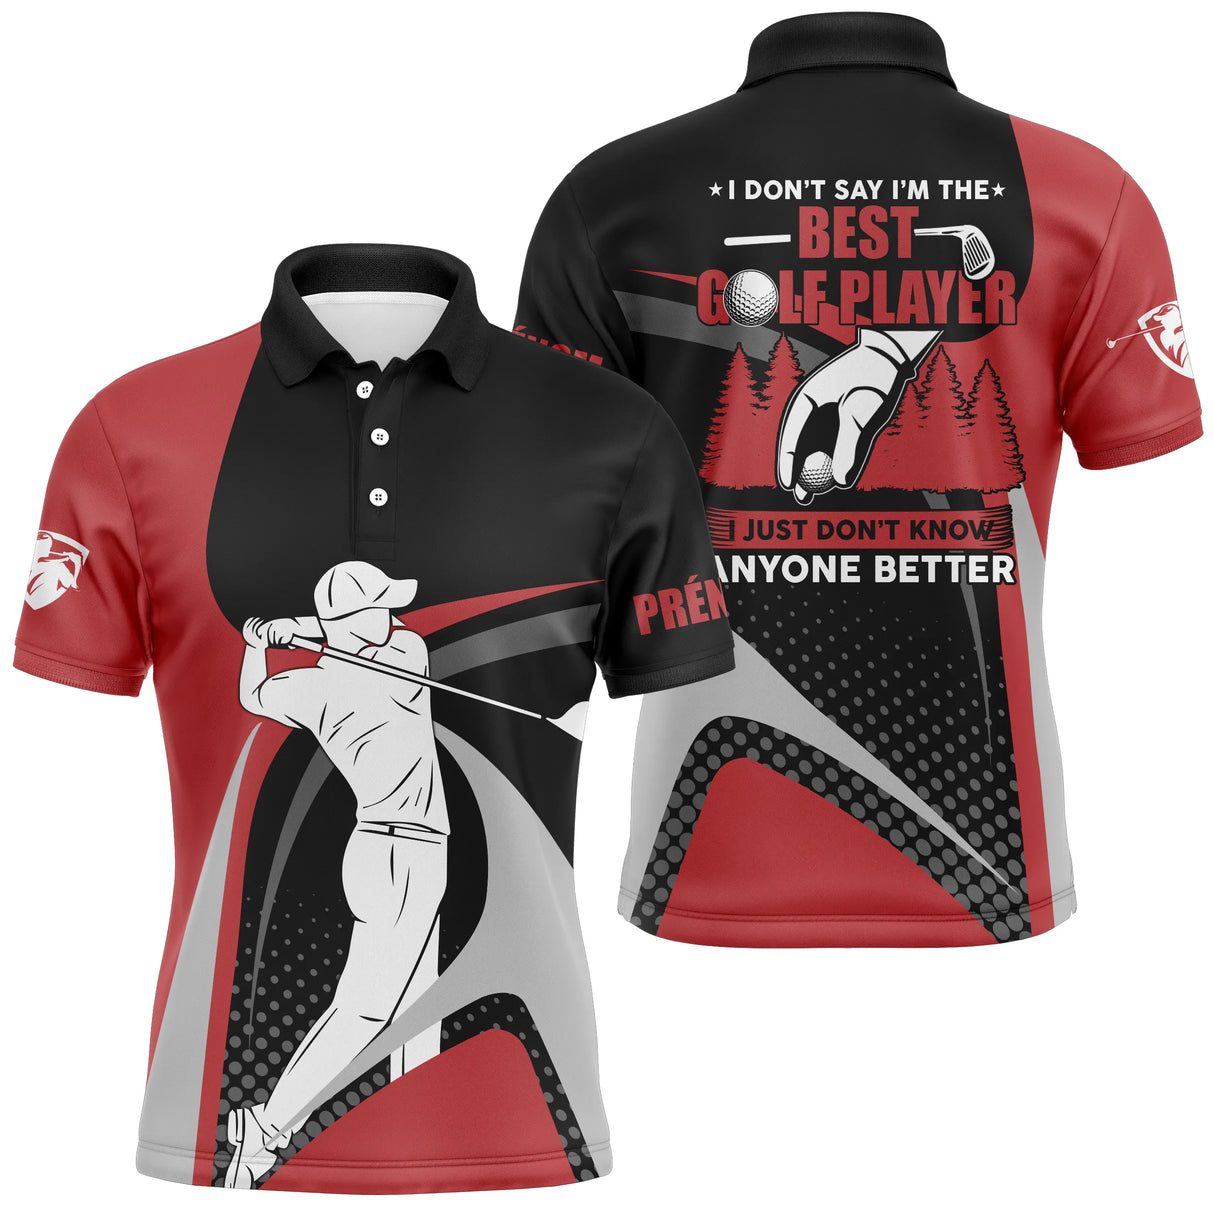 Personalized Humorous Golf Polo Shirt for Men/Women - I Don't Know Anyone Better - CT04072312